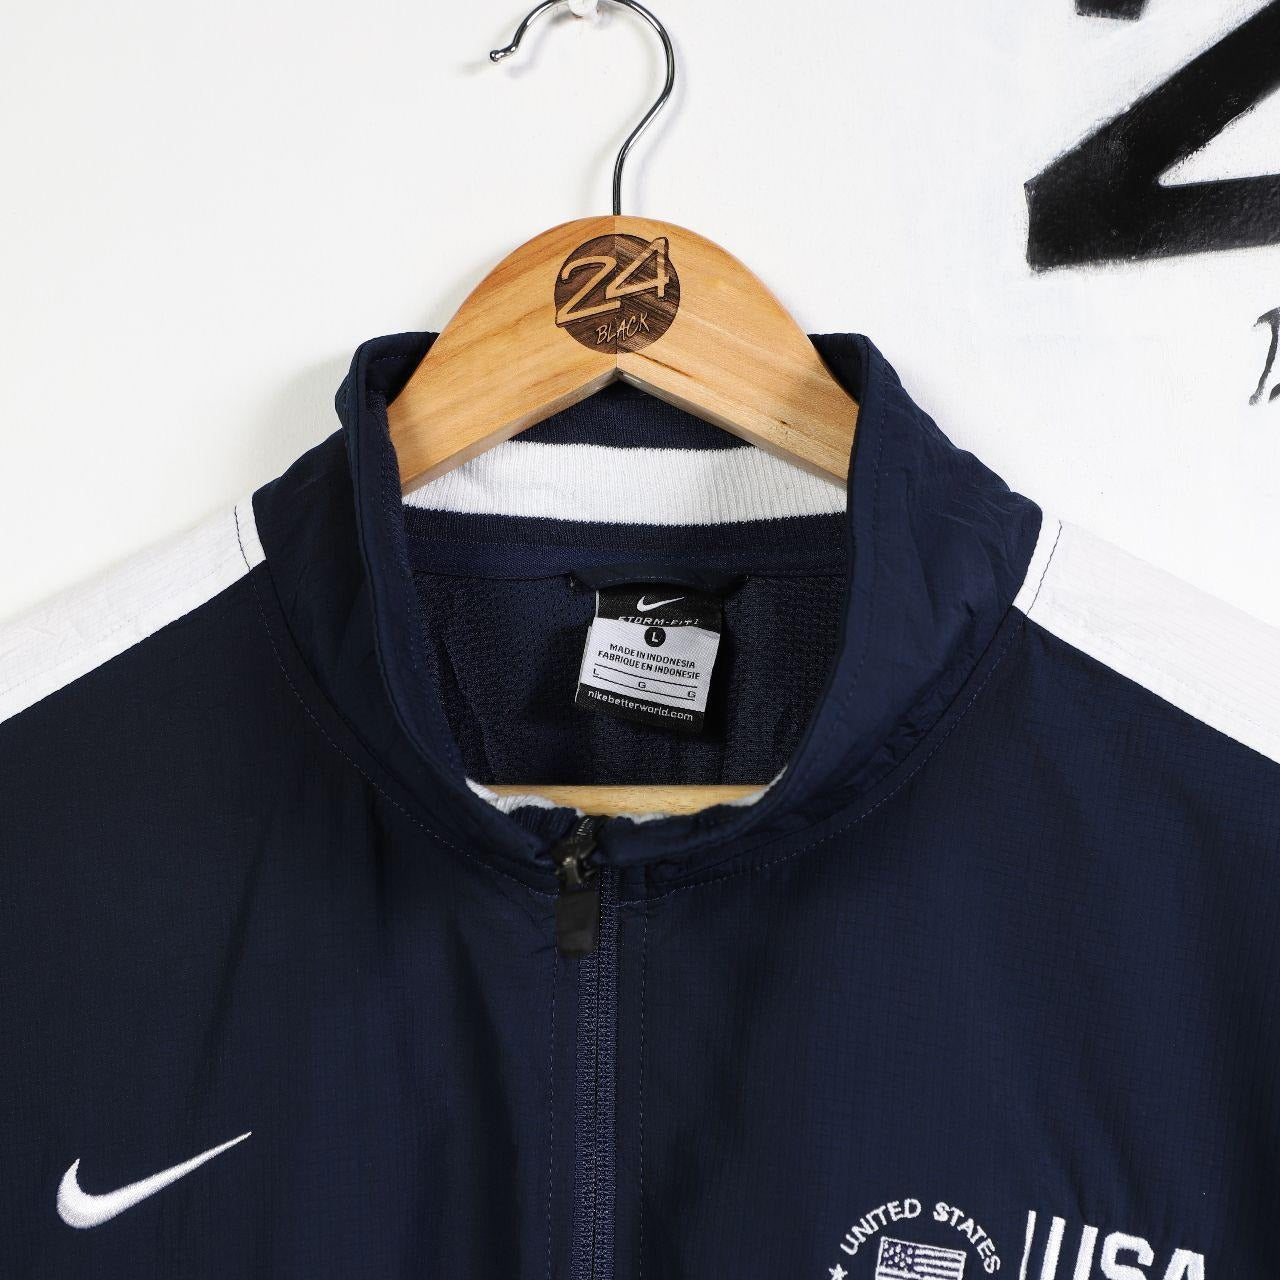 Nike U.S.A Paralympic Olympic Committee Team Jacket